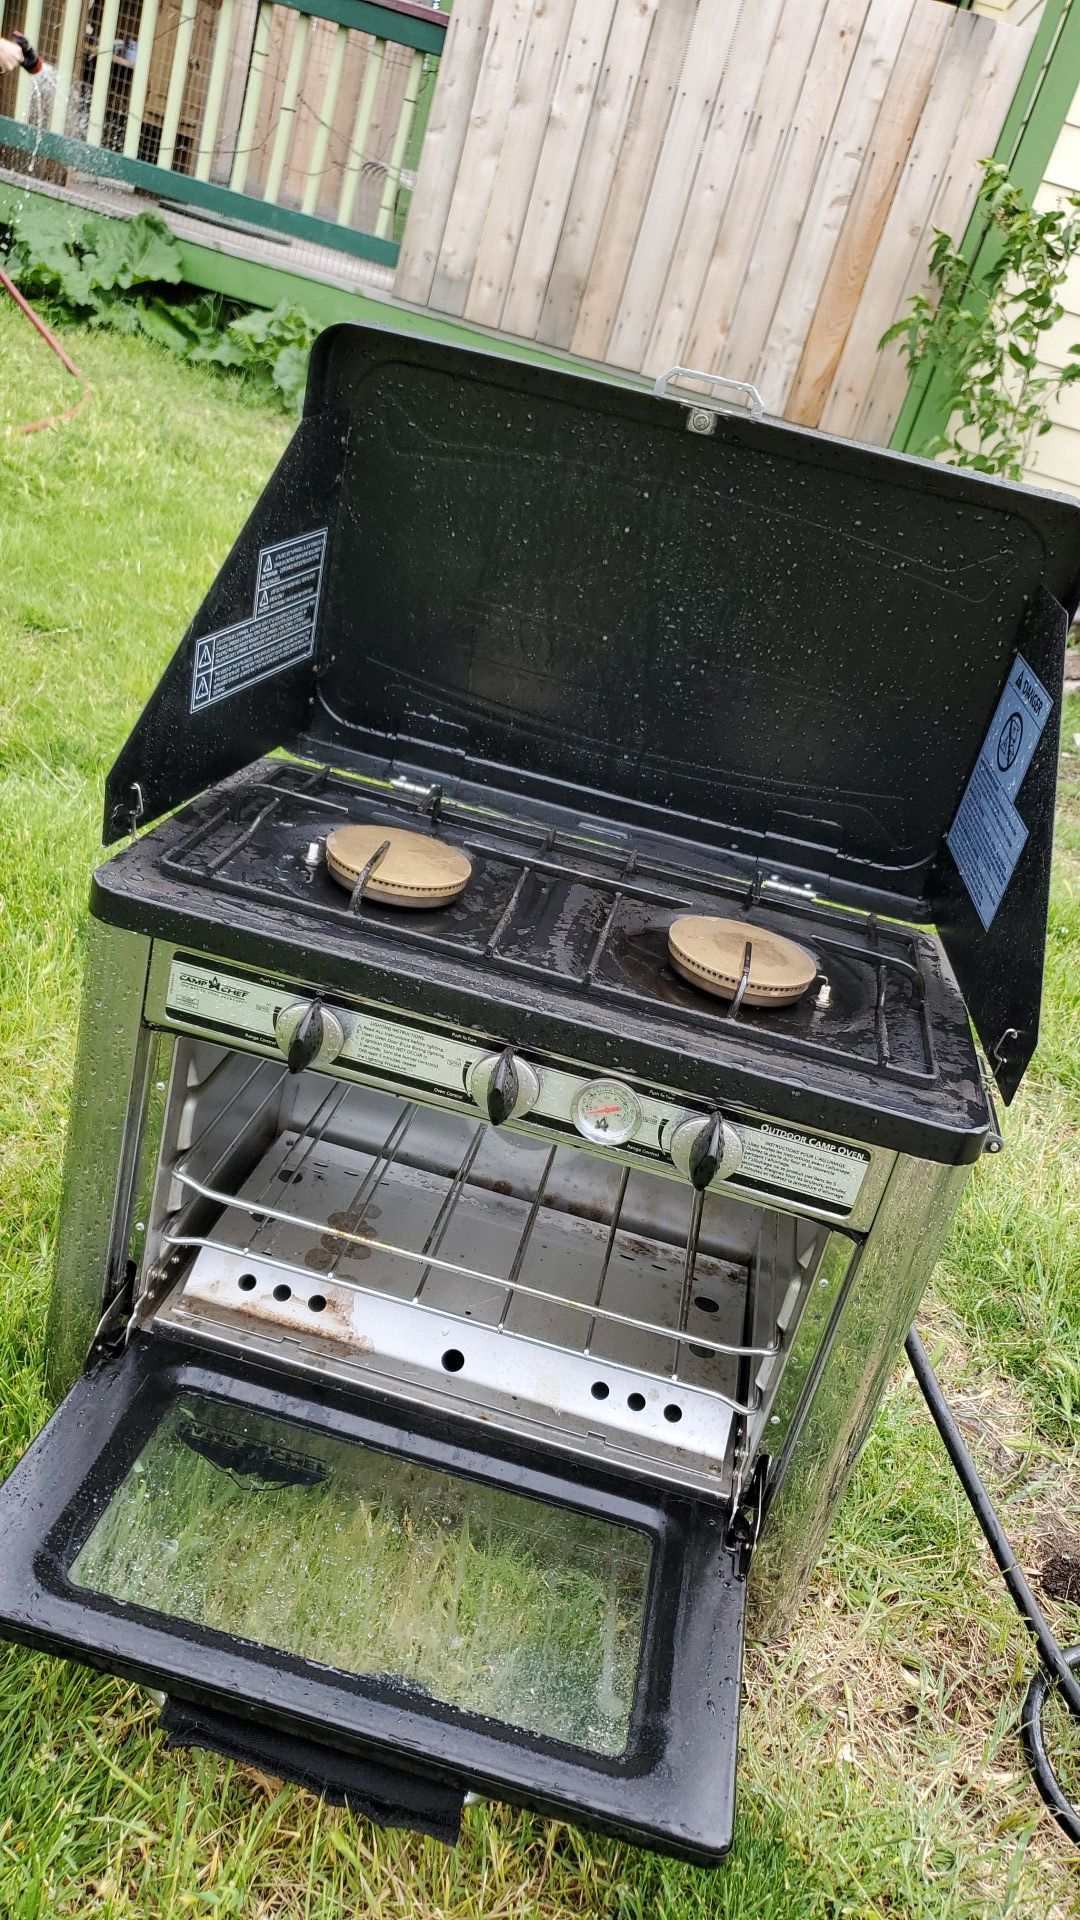 Camp chef camper oven/stove top